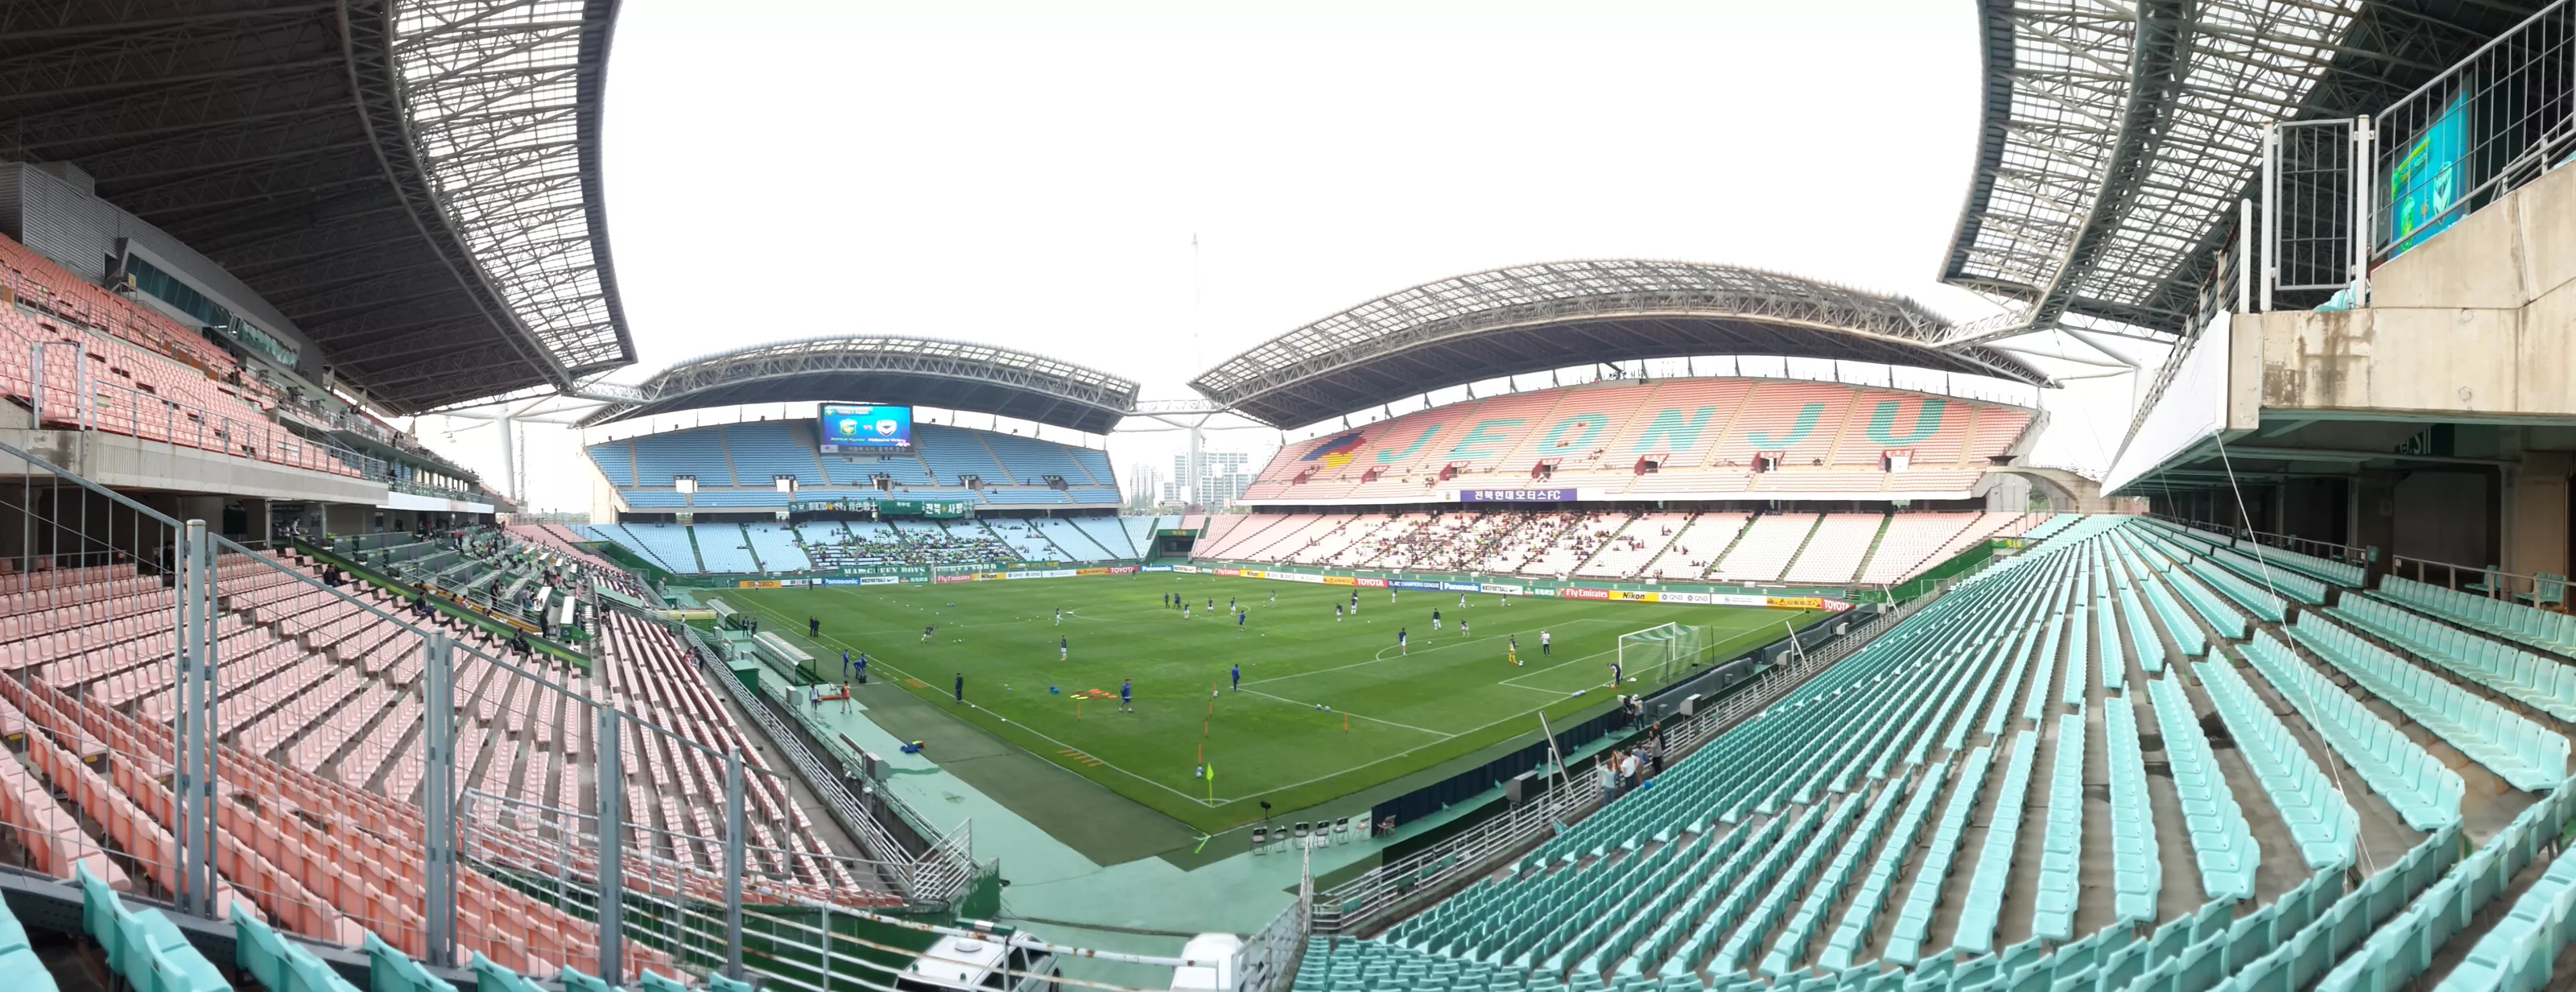 Jeonju World Cup Stadium in South Korea, East Asia | Football - Rated 3.6